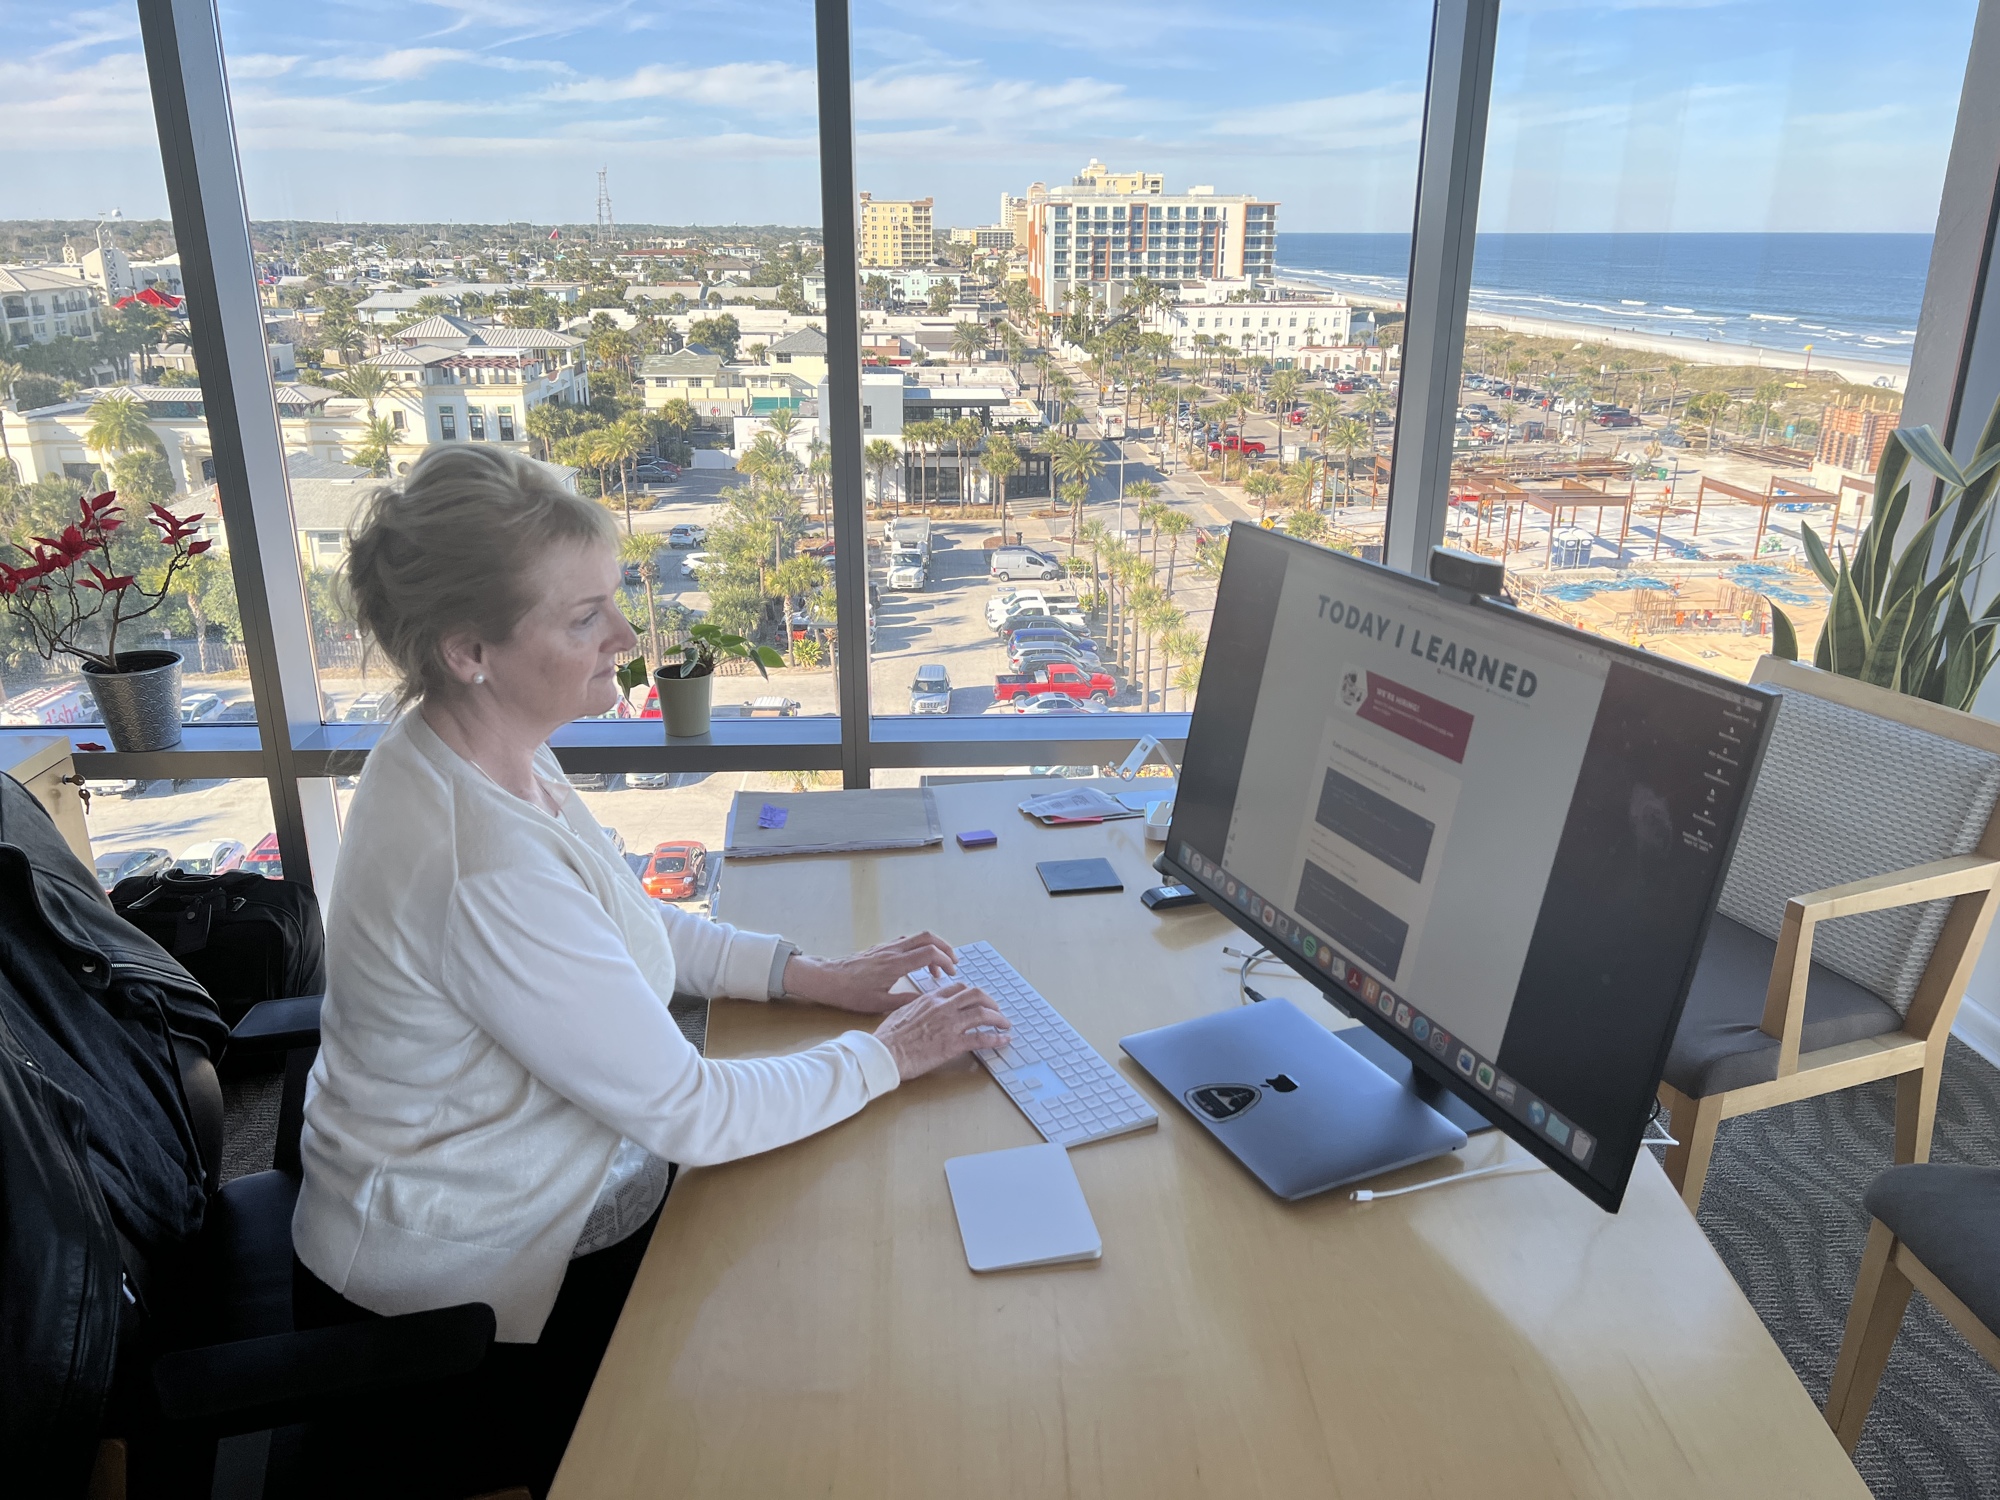 From the company’s offices on the seventh floor at 320 N. First St. in Jacksonville Beach, Hashrocket CEO Marian Phelan shows the company’s “Today I Learned” website that helps computer programmers find solutions and fixes and share ideas.